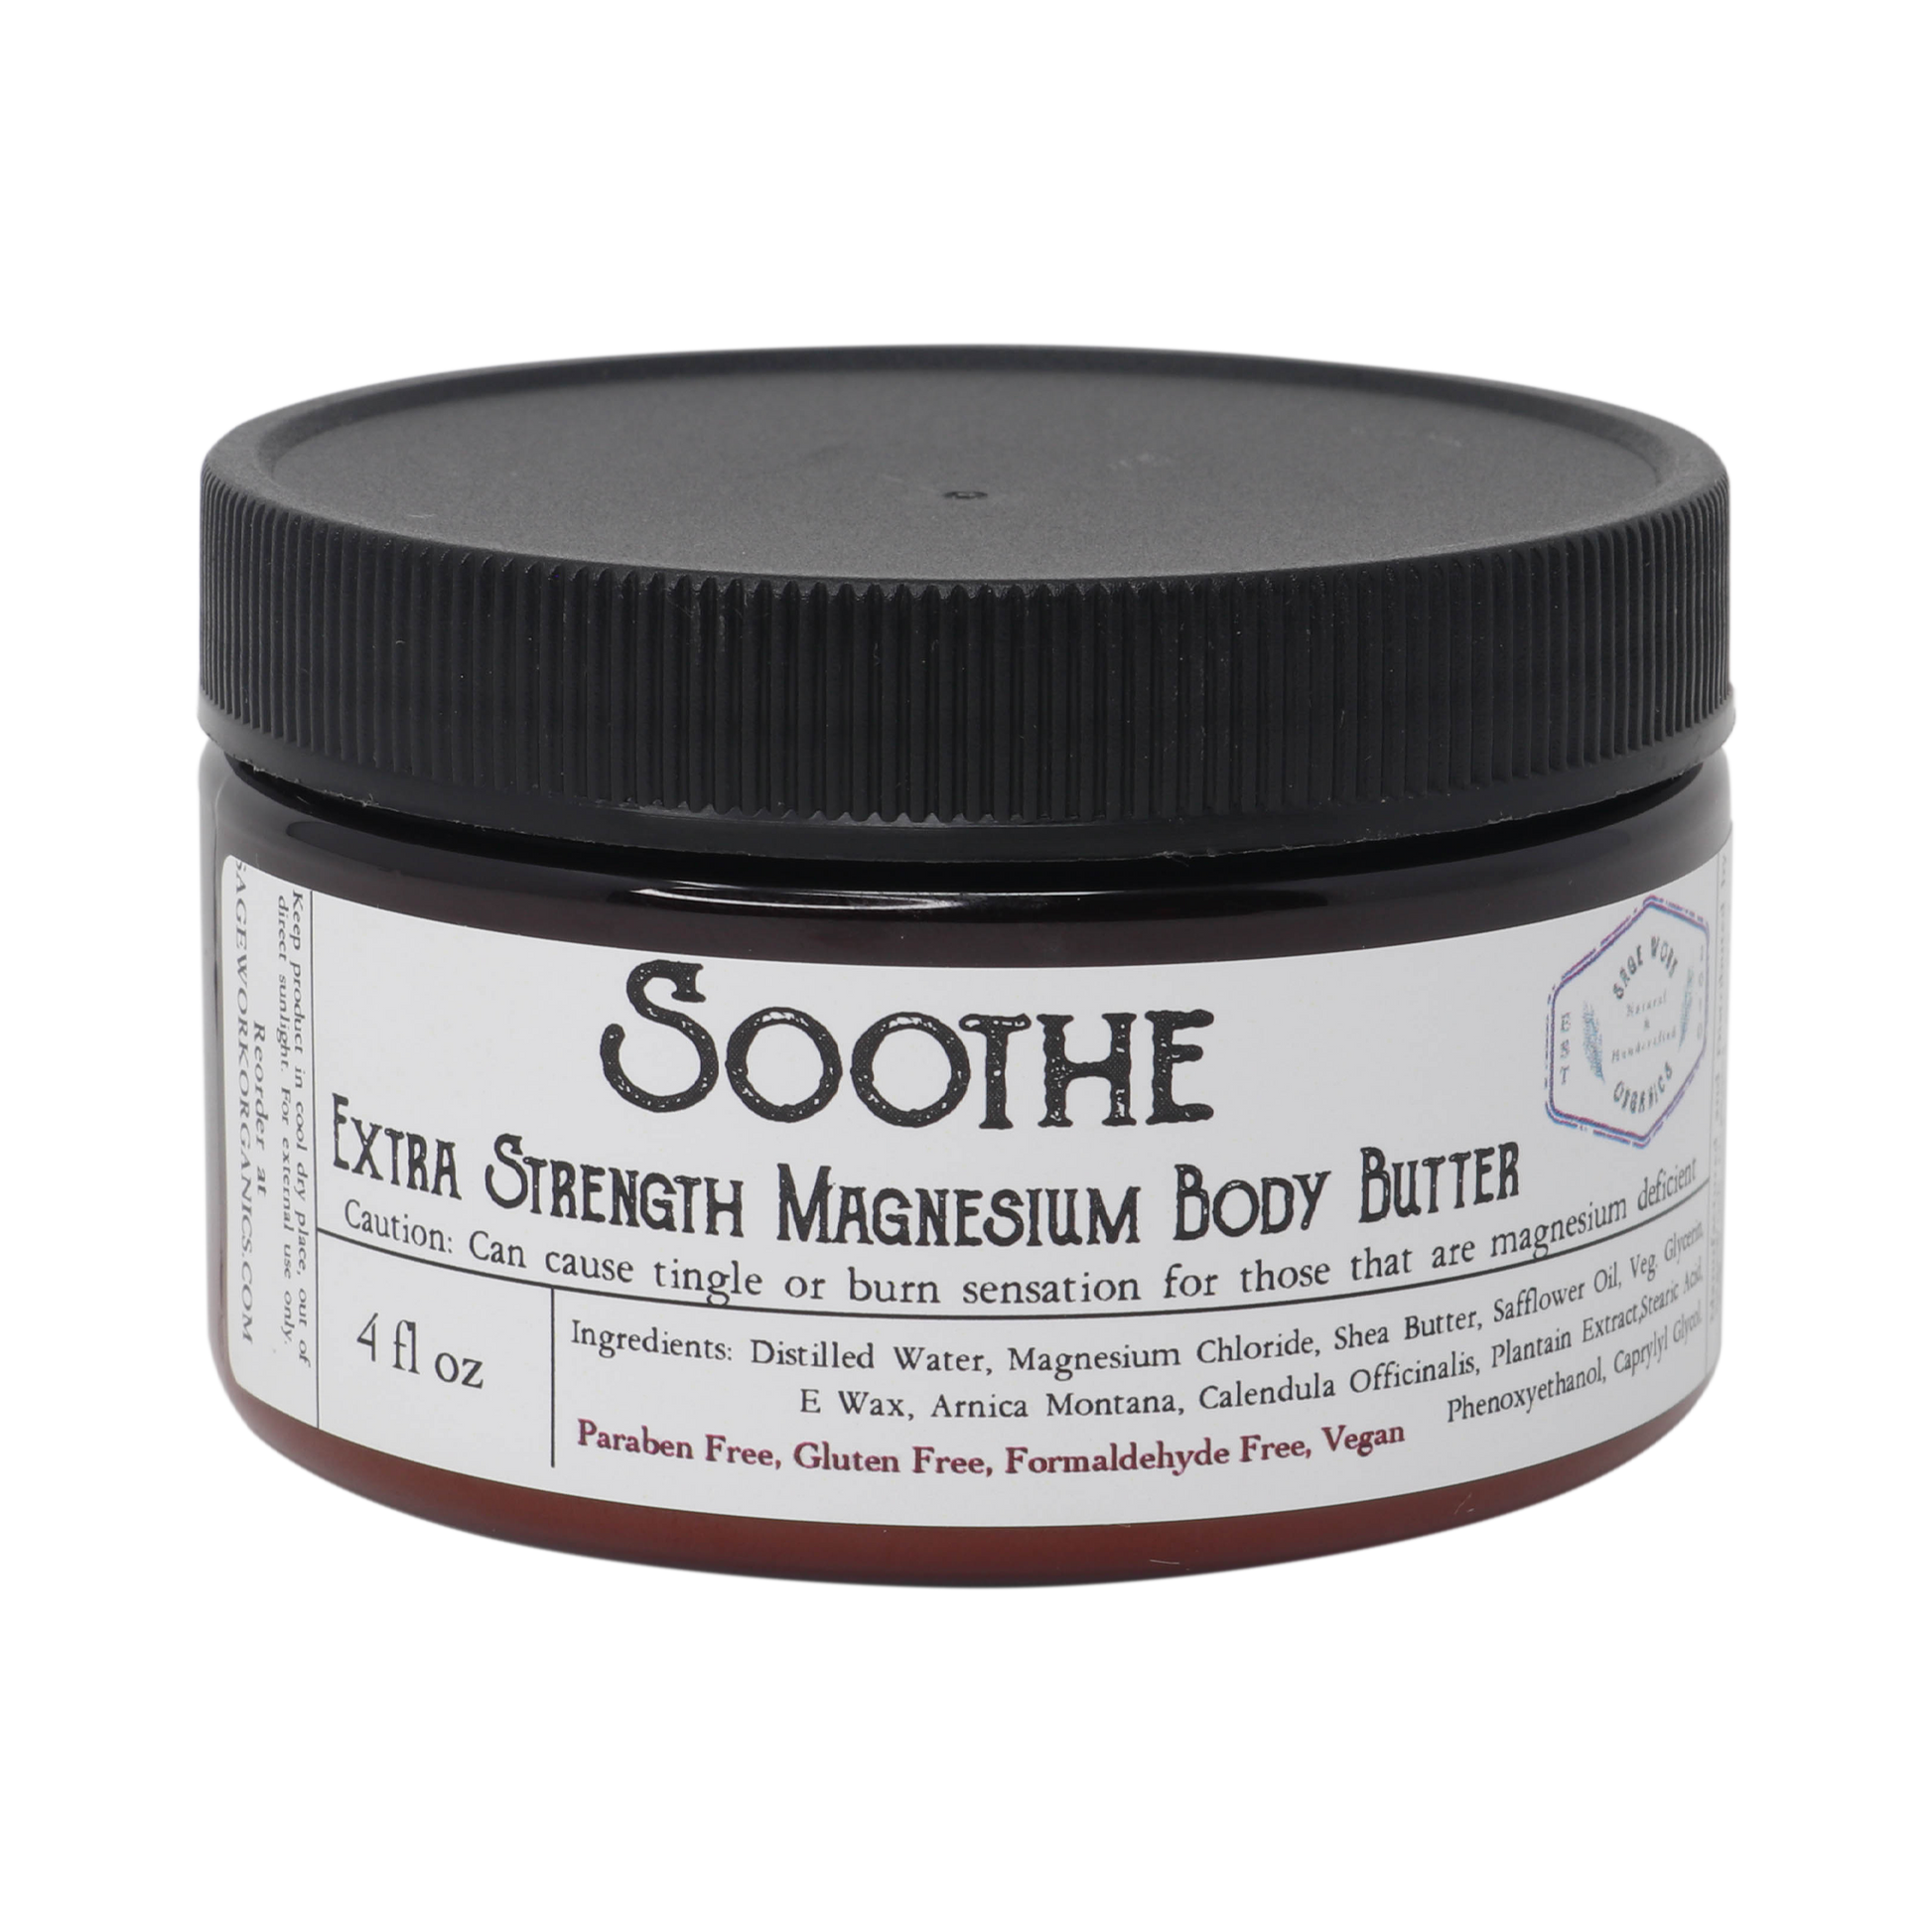 Extra Strength Magnesium Body Butter for Inflammation or Pain